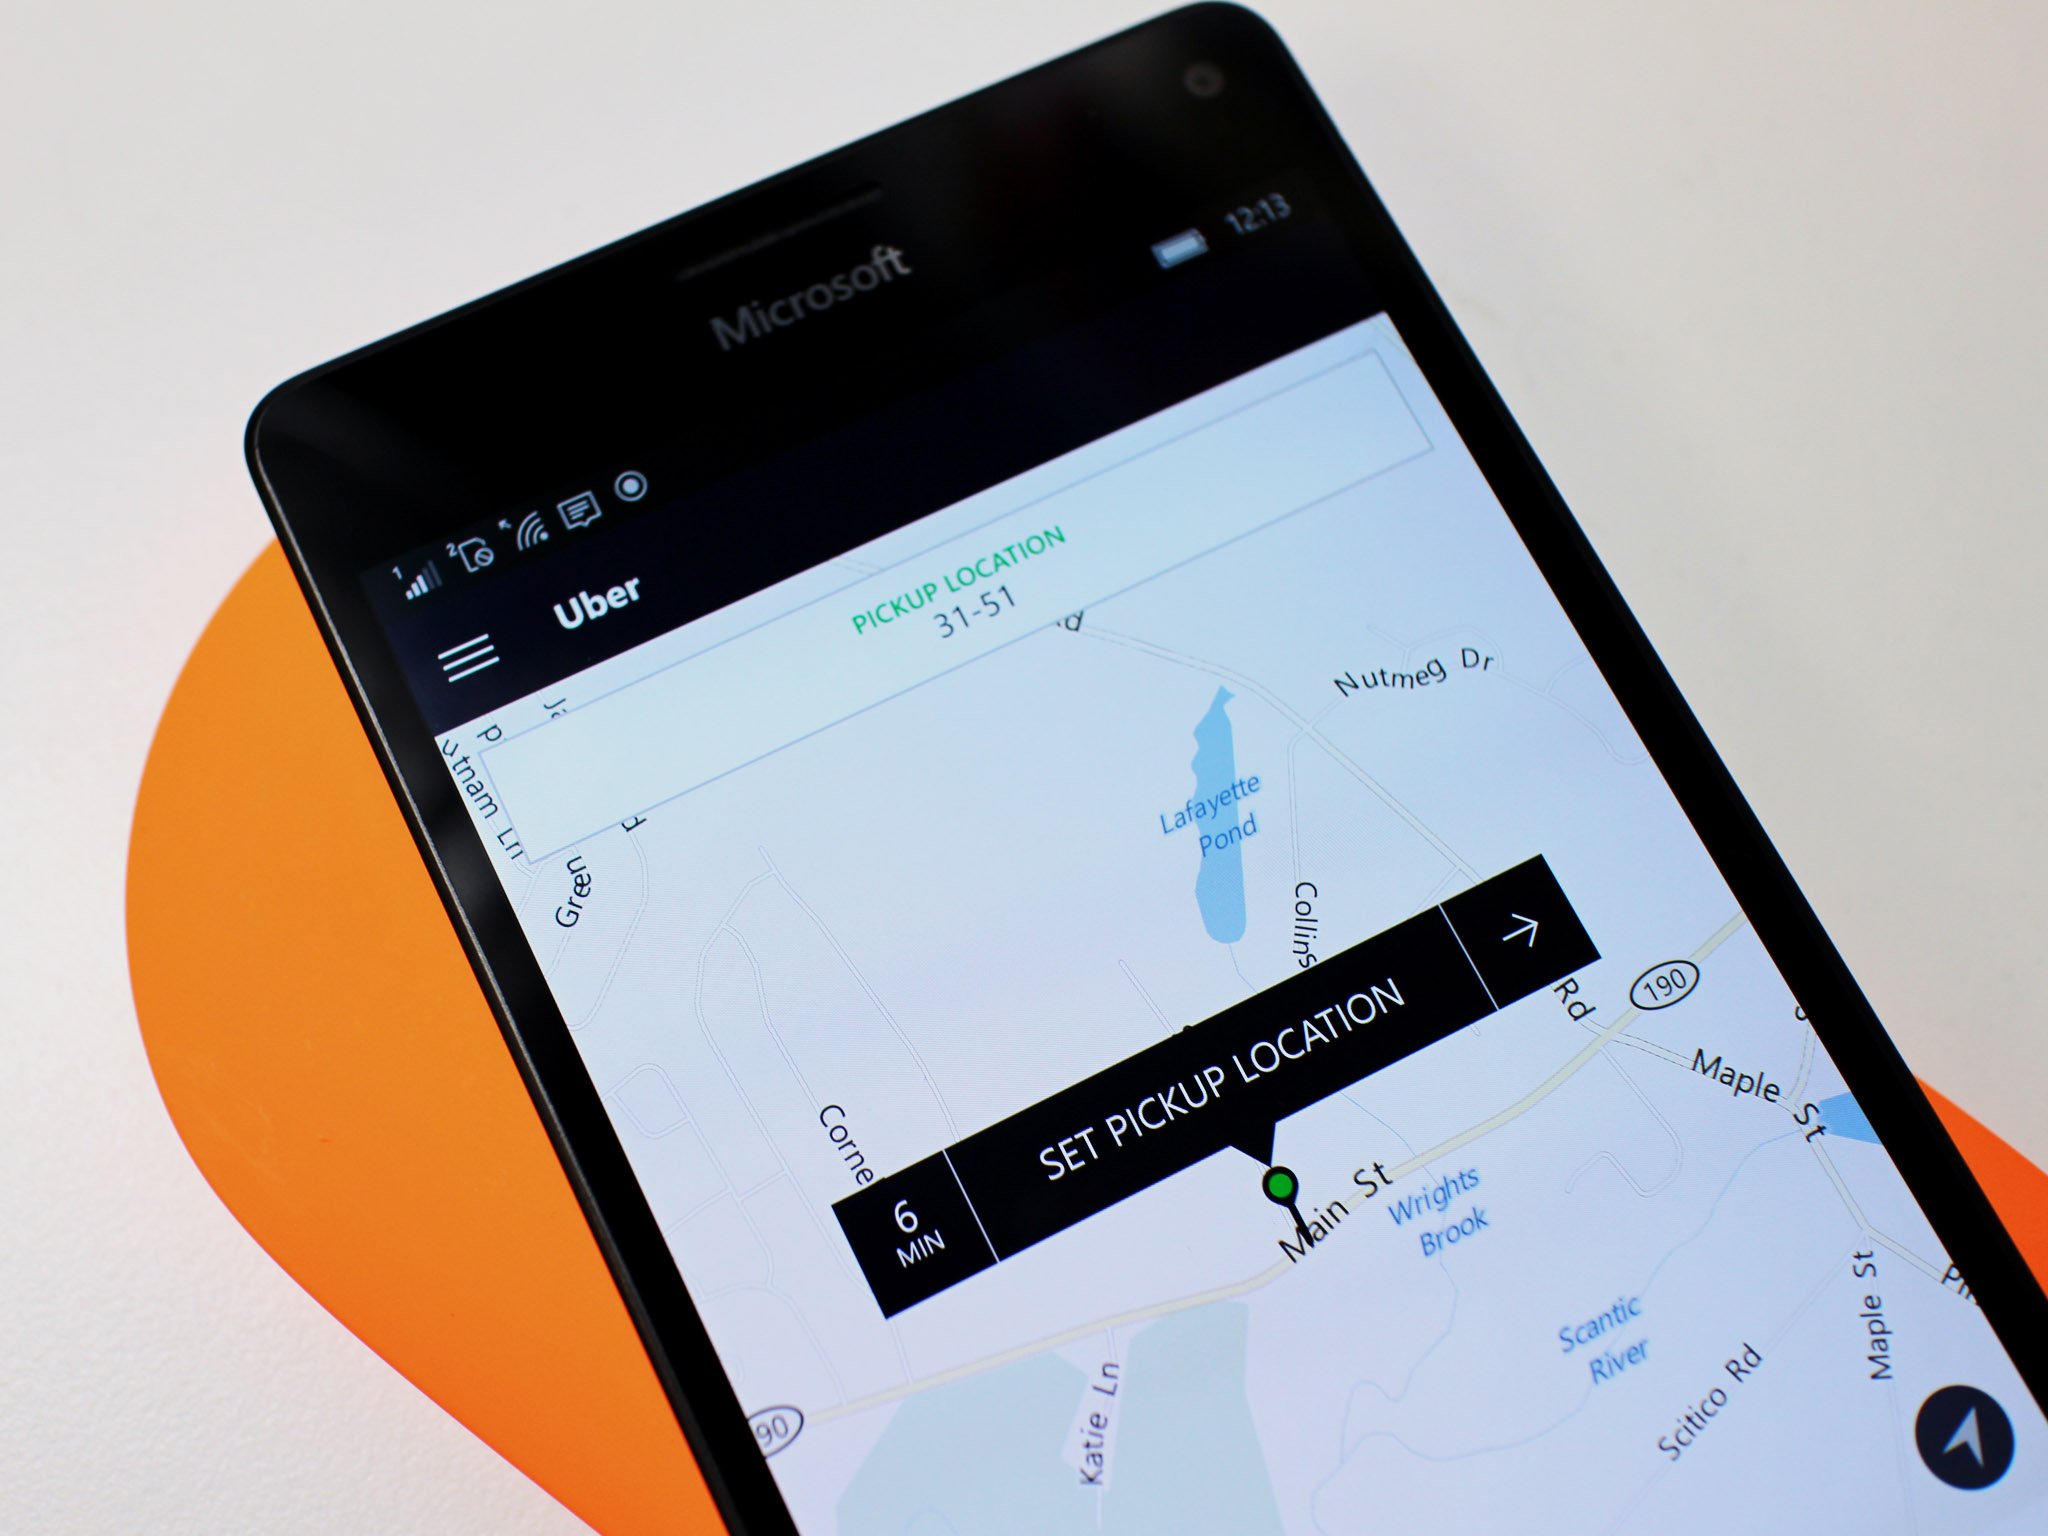 Uber app gets updated for Windows 10 Mobile with new layout | Windows Central